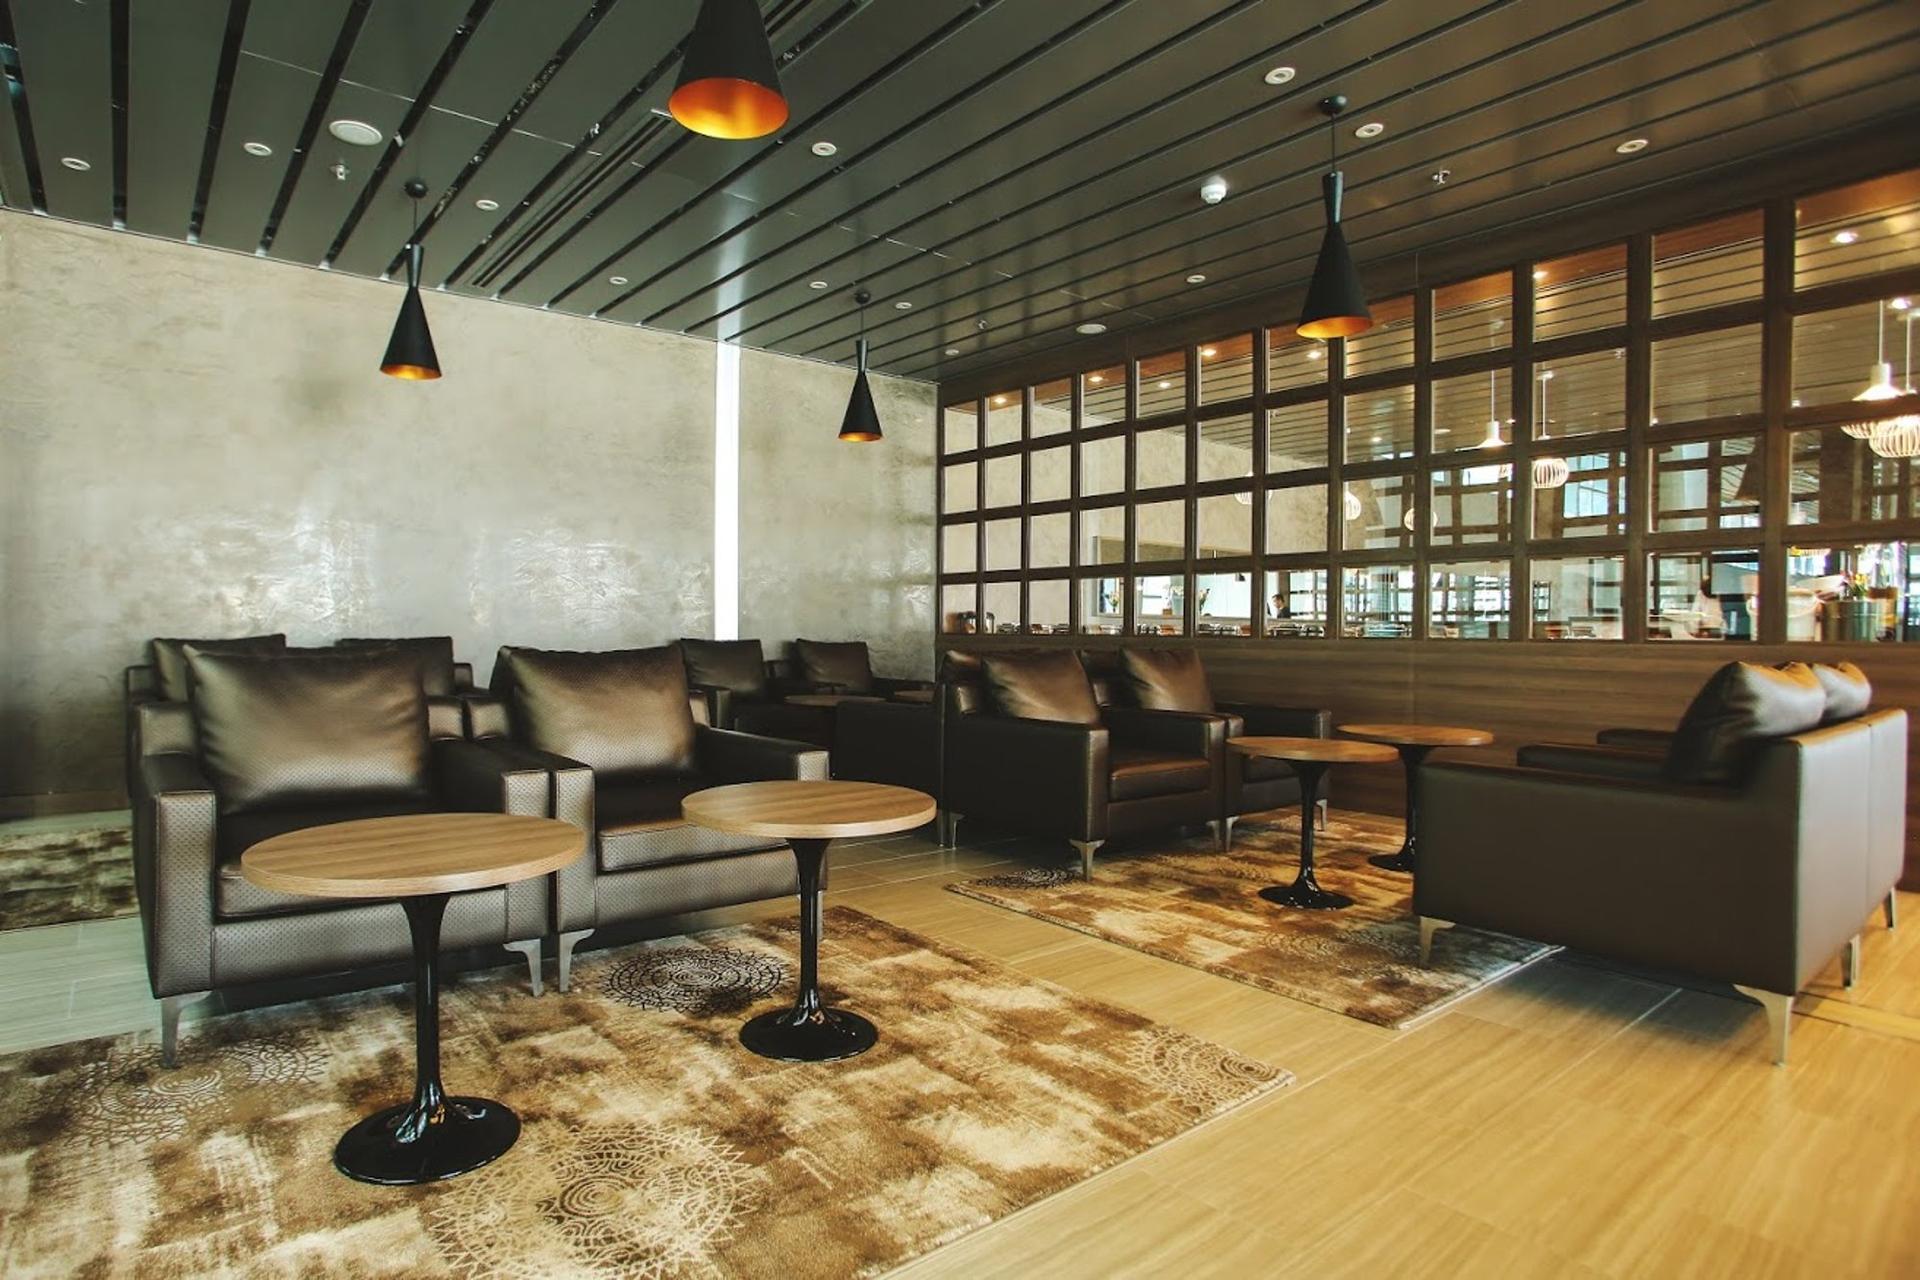 CIP Orchid Lounge image 2 of 26